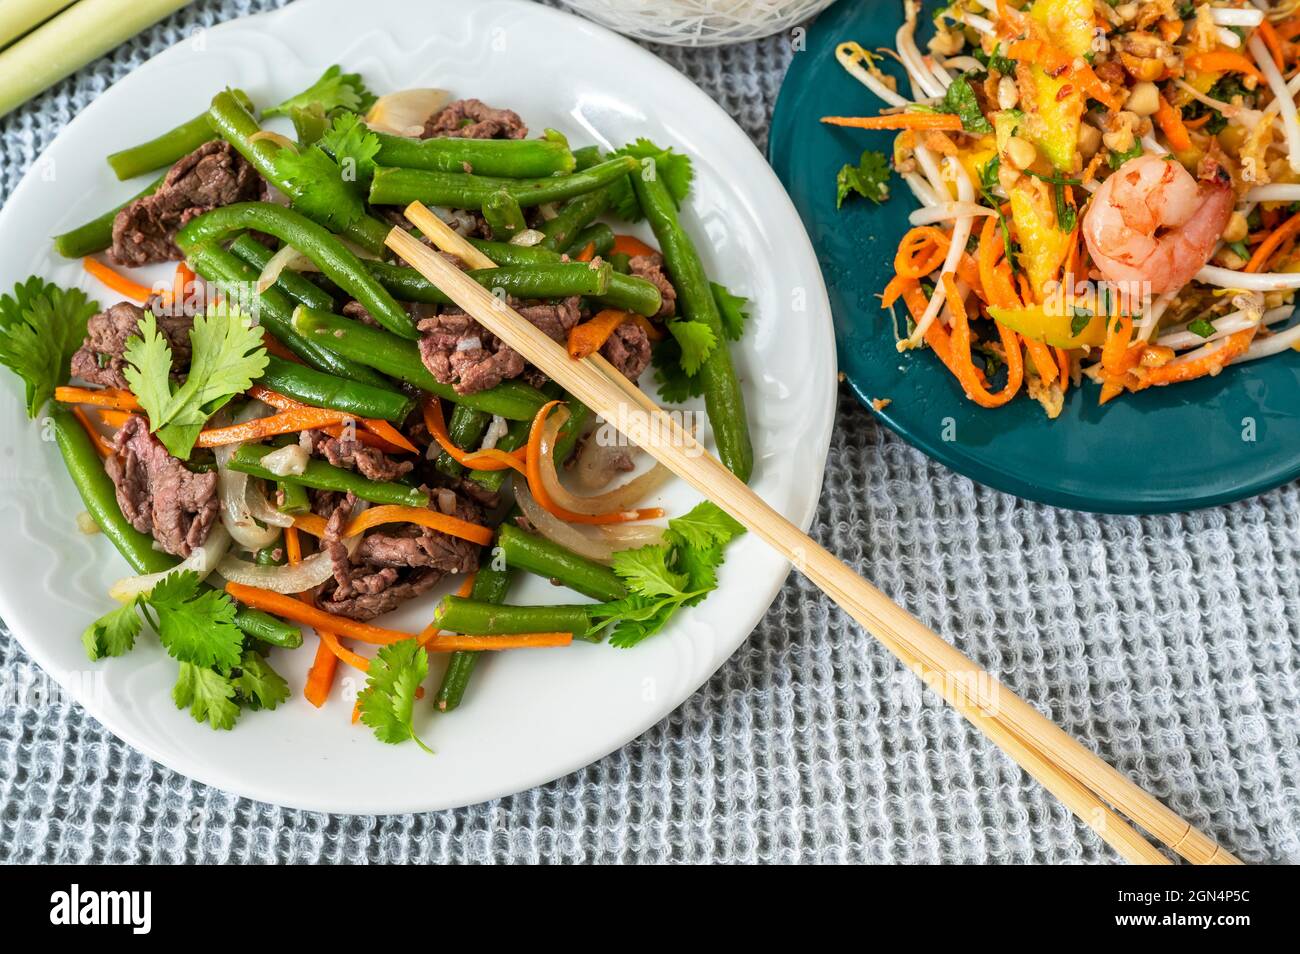 Two plates on table with traditional vietnamese meal and chopstick. Fried beef with green bean, carrot and onion and mango salad with shrimp. Stock Photo